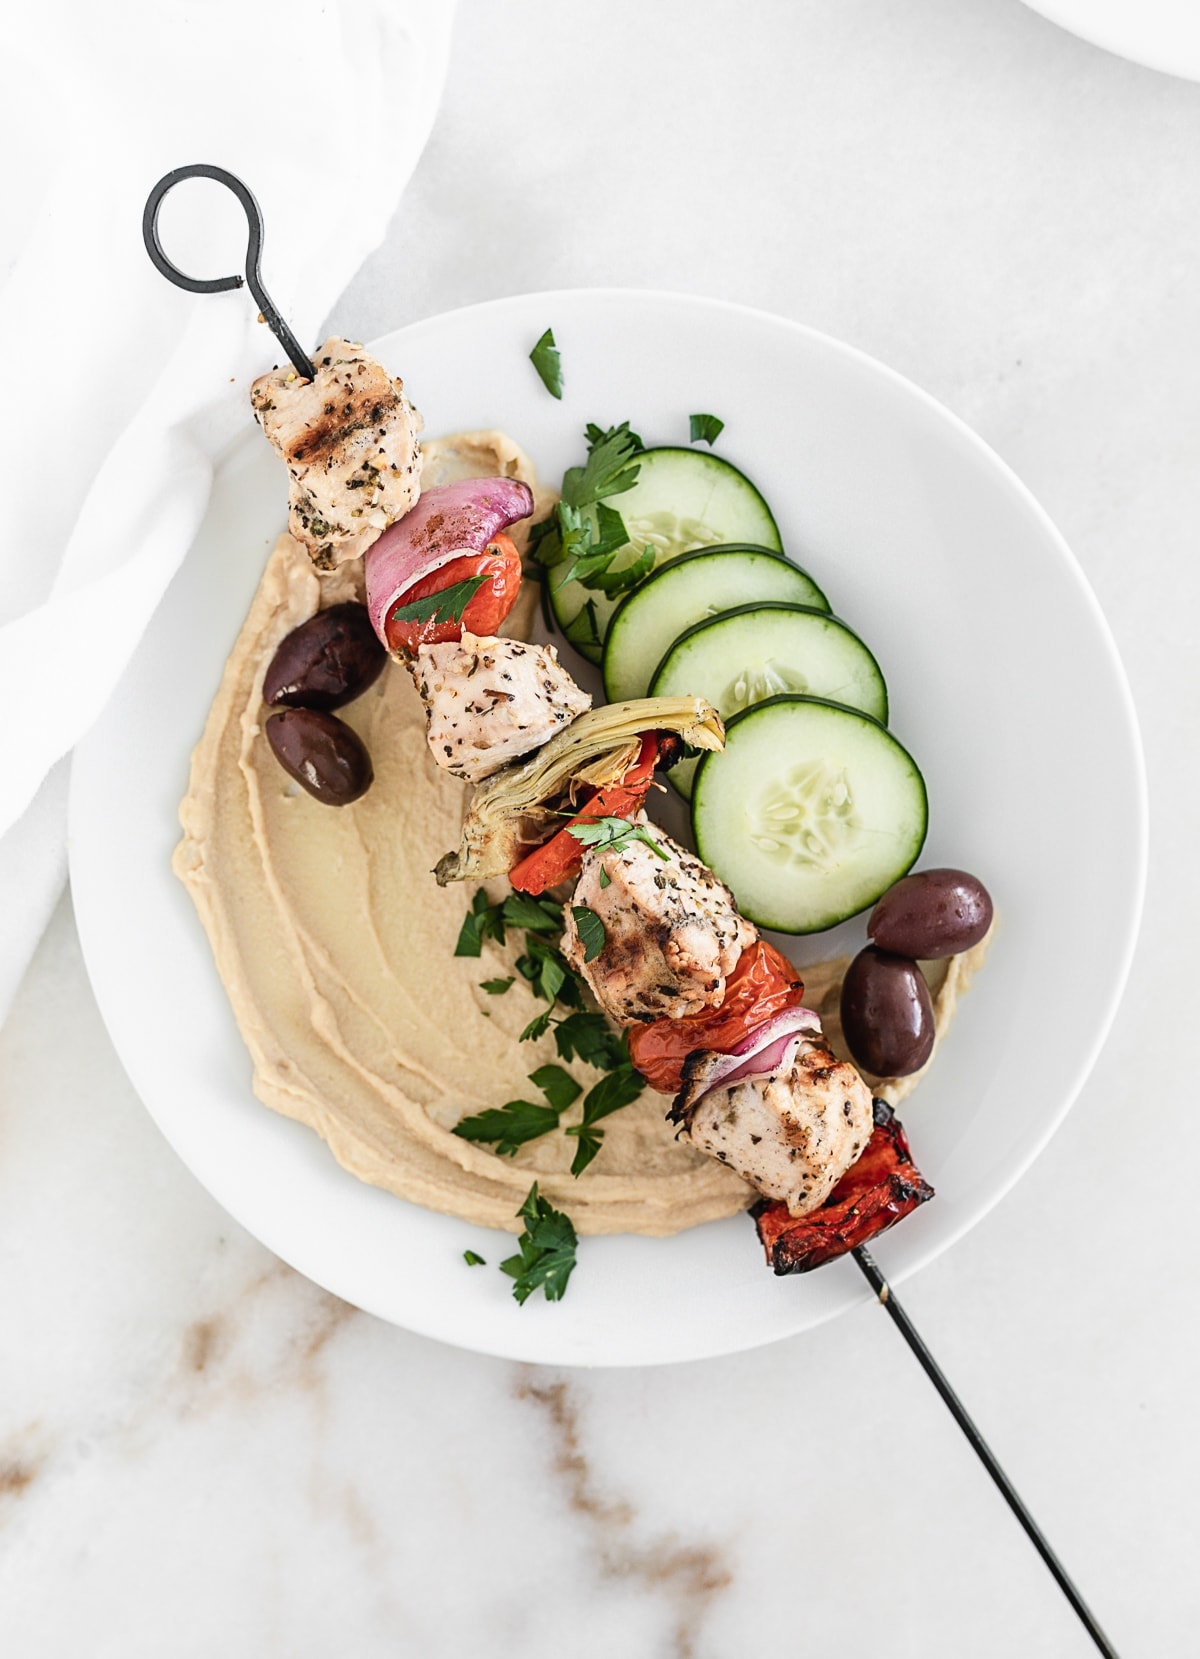 Make the most of late summer produce with these Mediterranean Chicken and Artichoke Kebabs! This healthy dinner is made entirely on the grill, no need for a steamer basket or boiling artichokes. (#glutenfree #dairy-free)| sponsored #artichokes #grilling | via livelytable.com